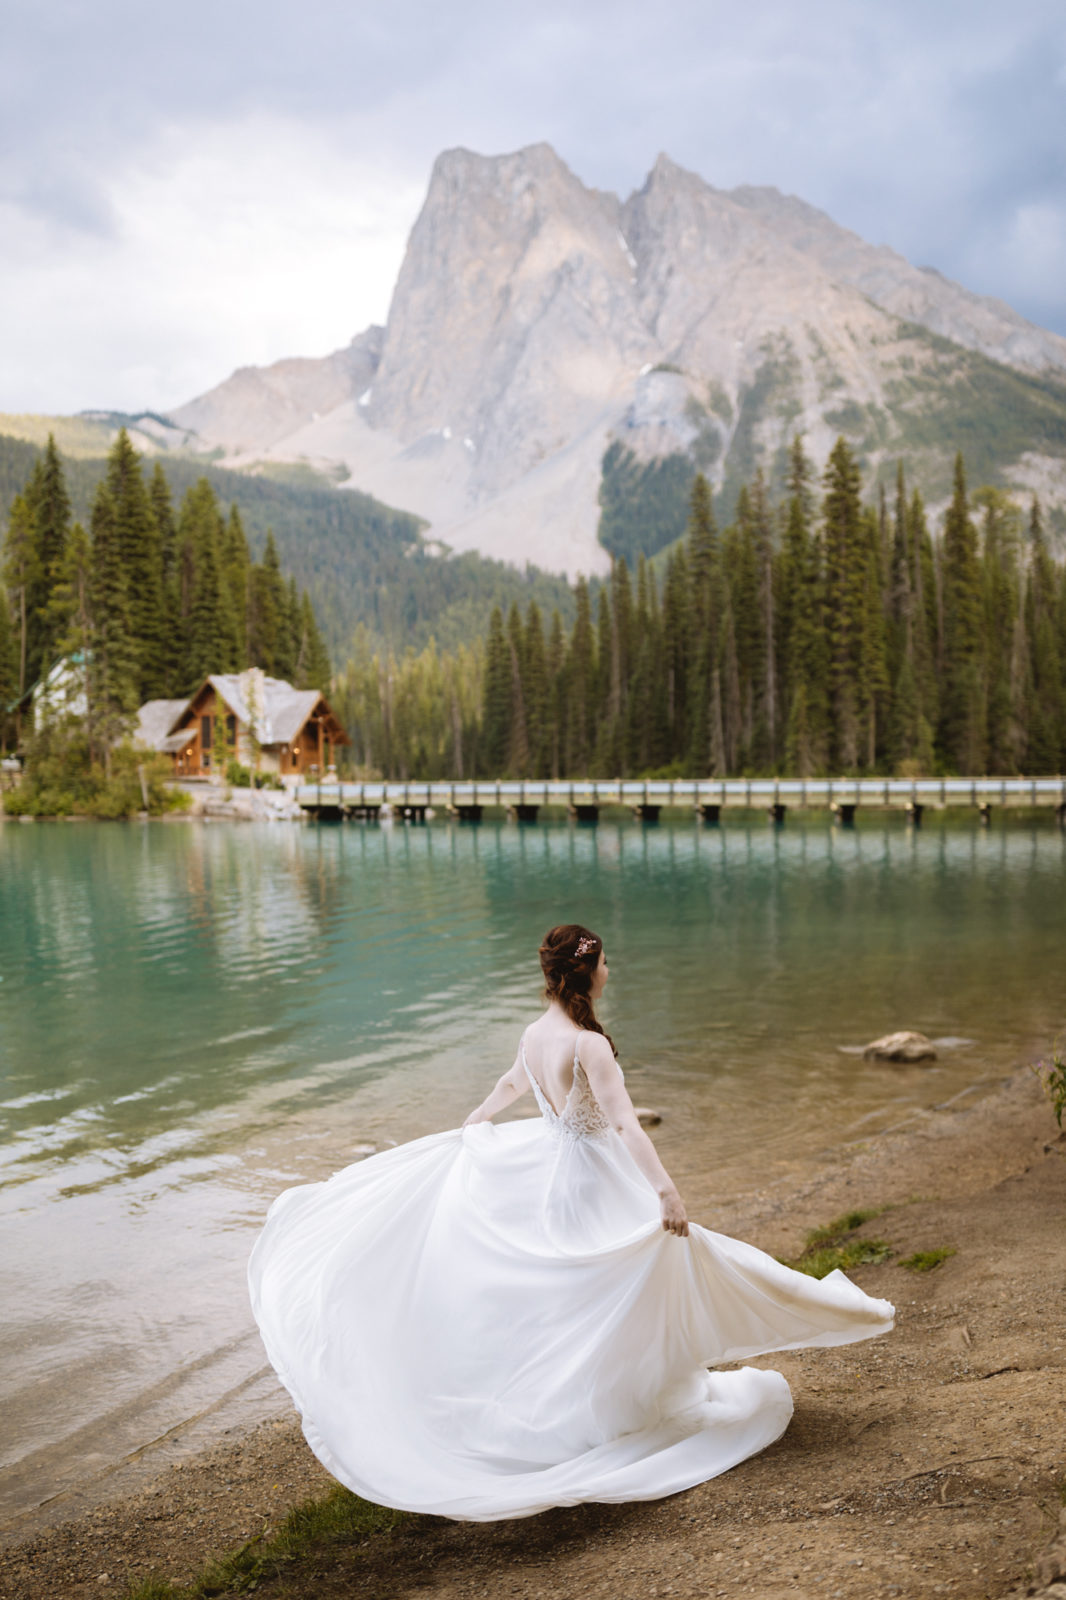 Bride shows off her romantic gown by twirling on the shores of Emerald Lake with Emerald Lake Lodge in the background